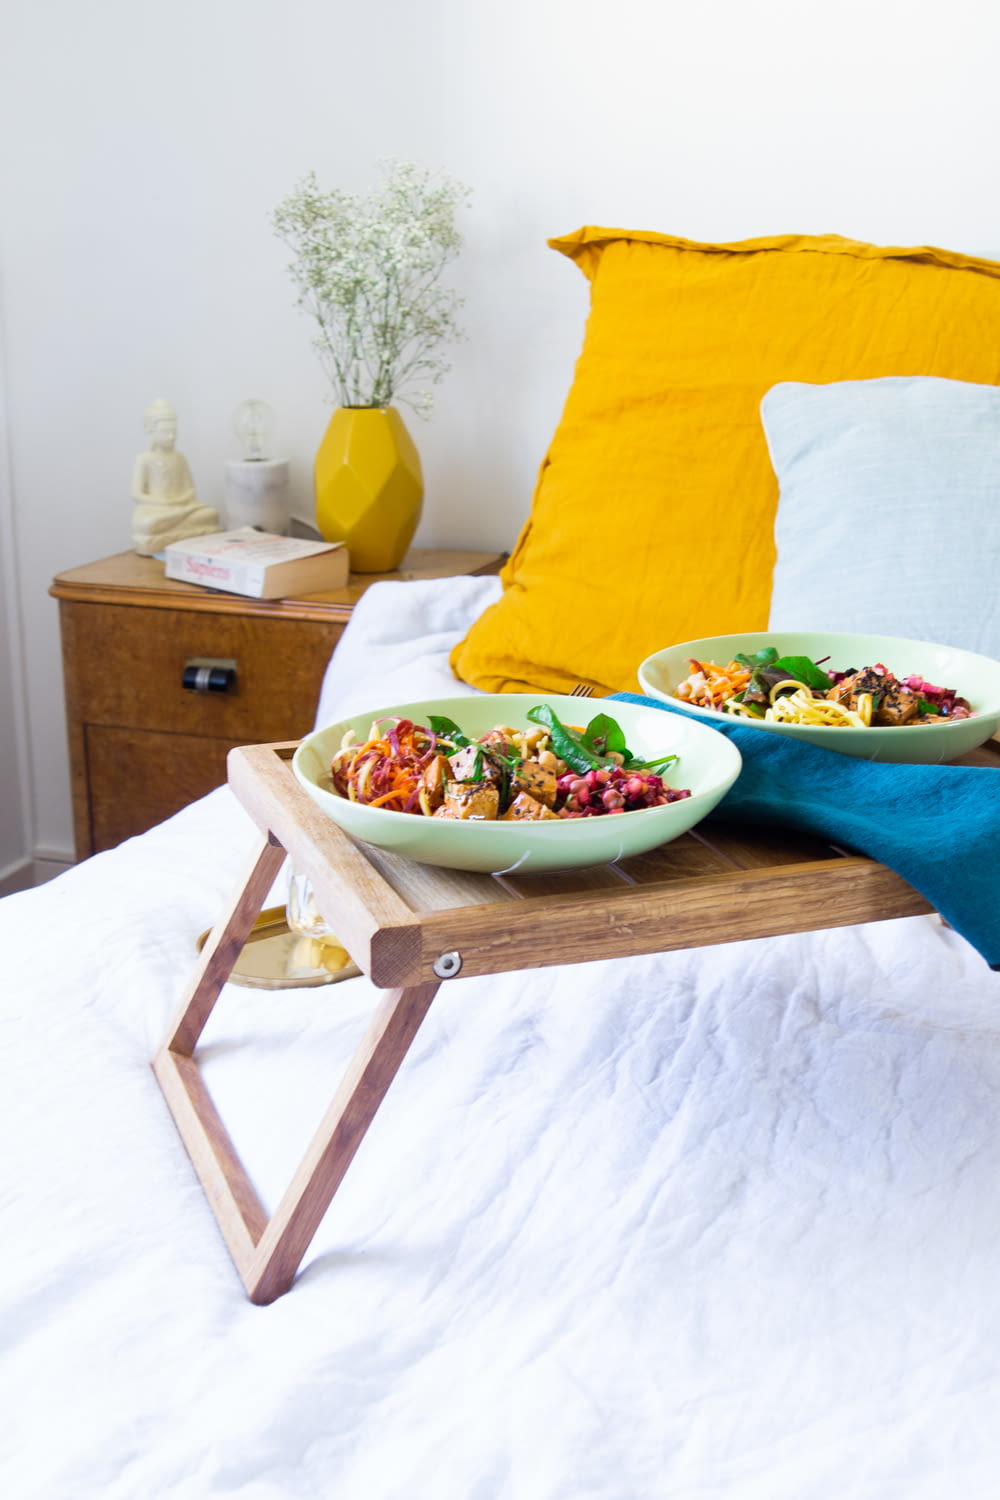 vegetable salad on white ceramic bowl beside yellow throw pillow on brown wooden table